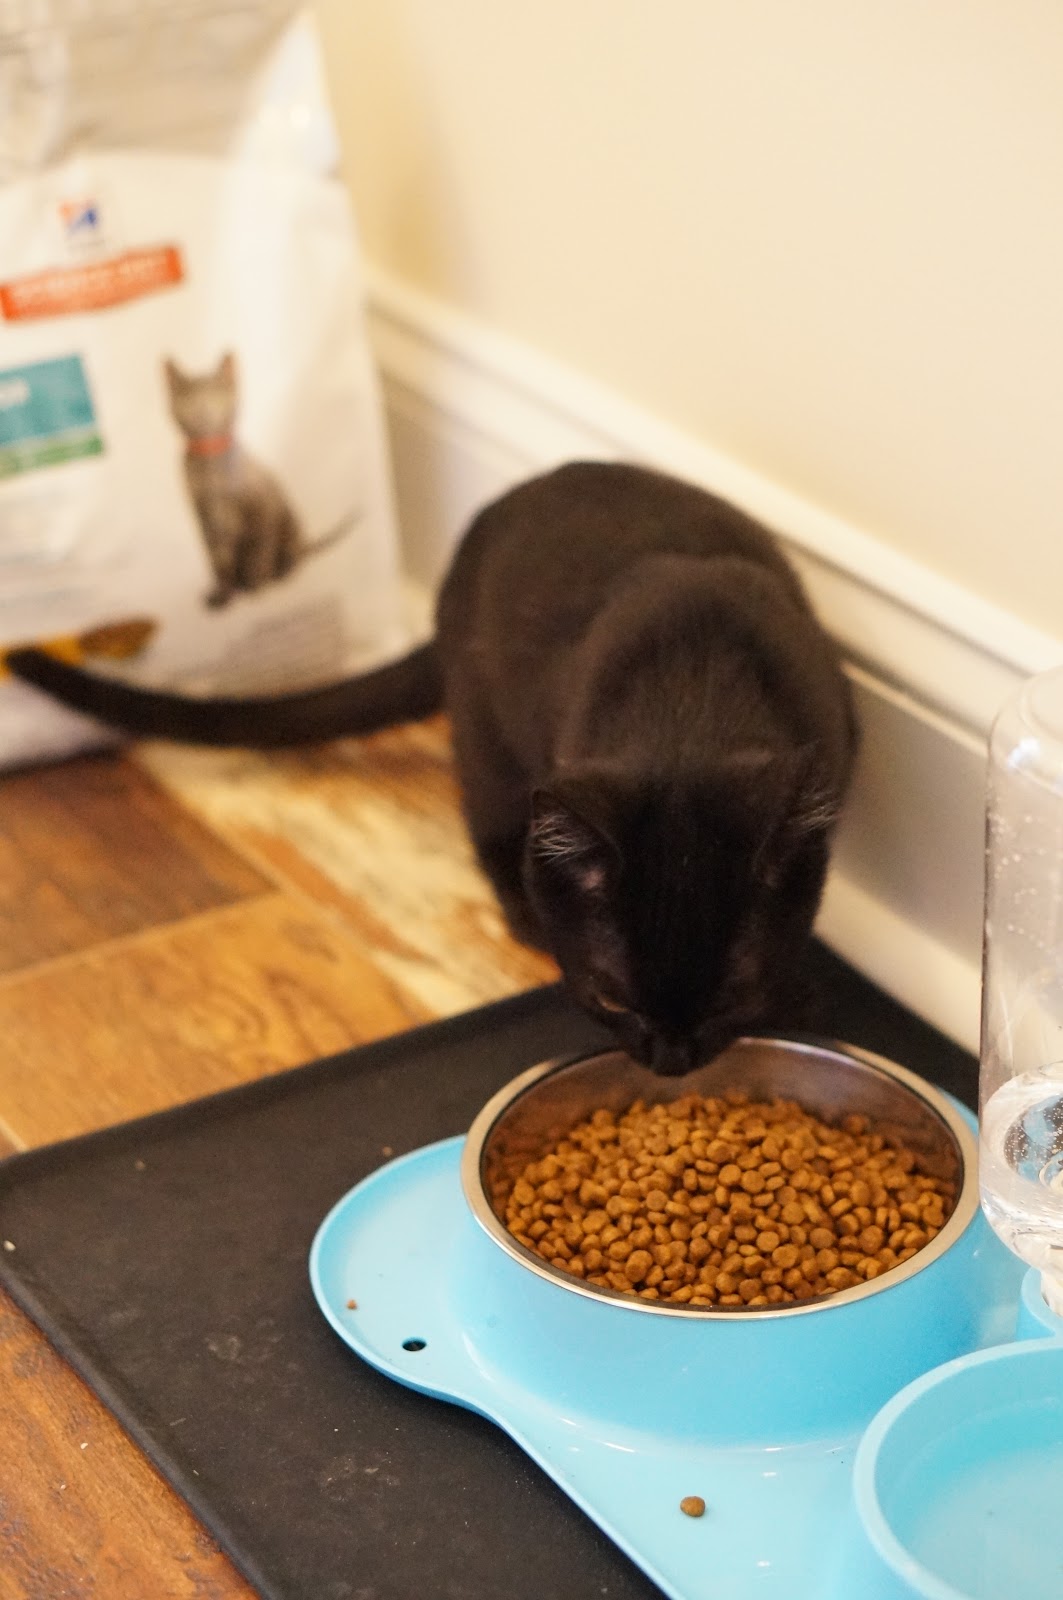 ADOPTING A KITTEN | SCIENCE DIET® by North Carolina lifestyle blogger Rebecca Lately